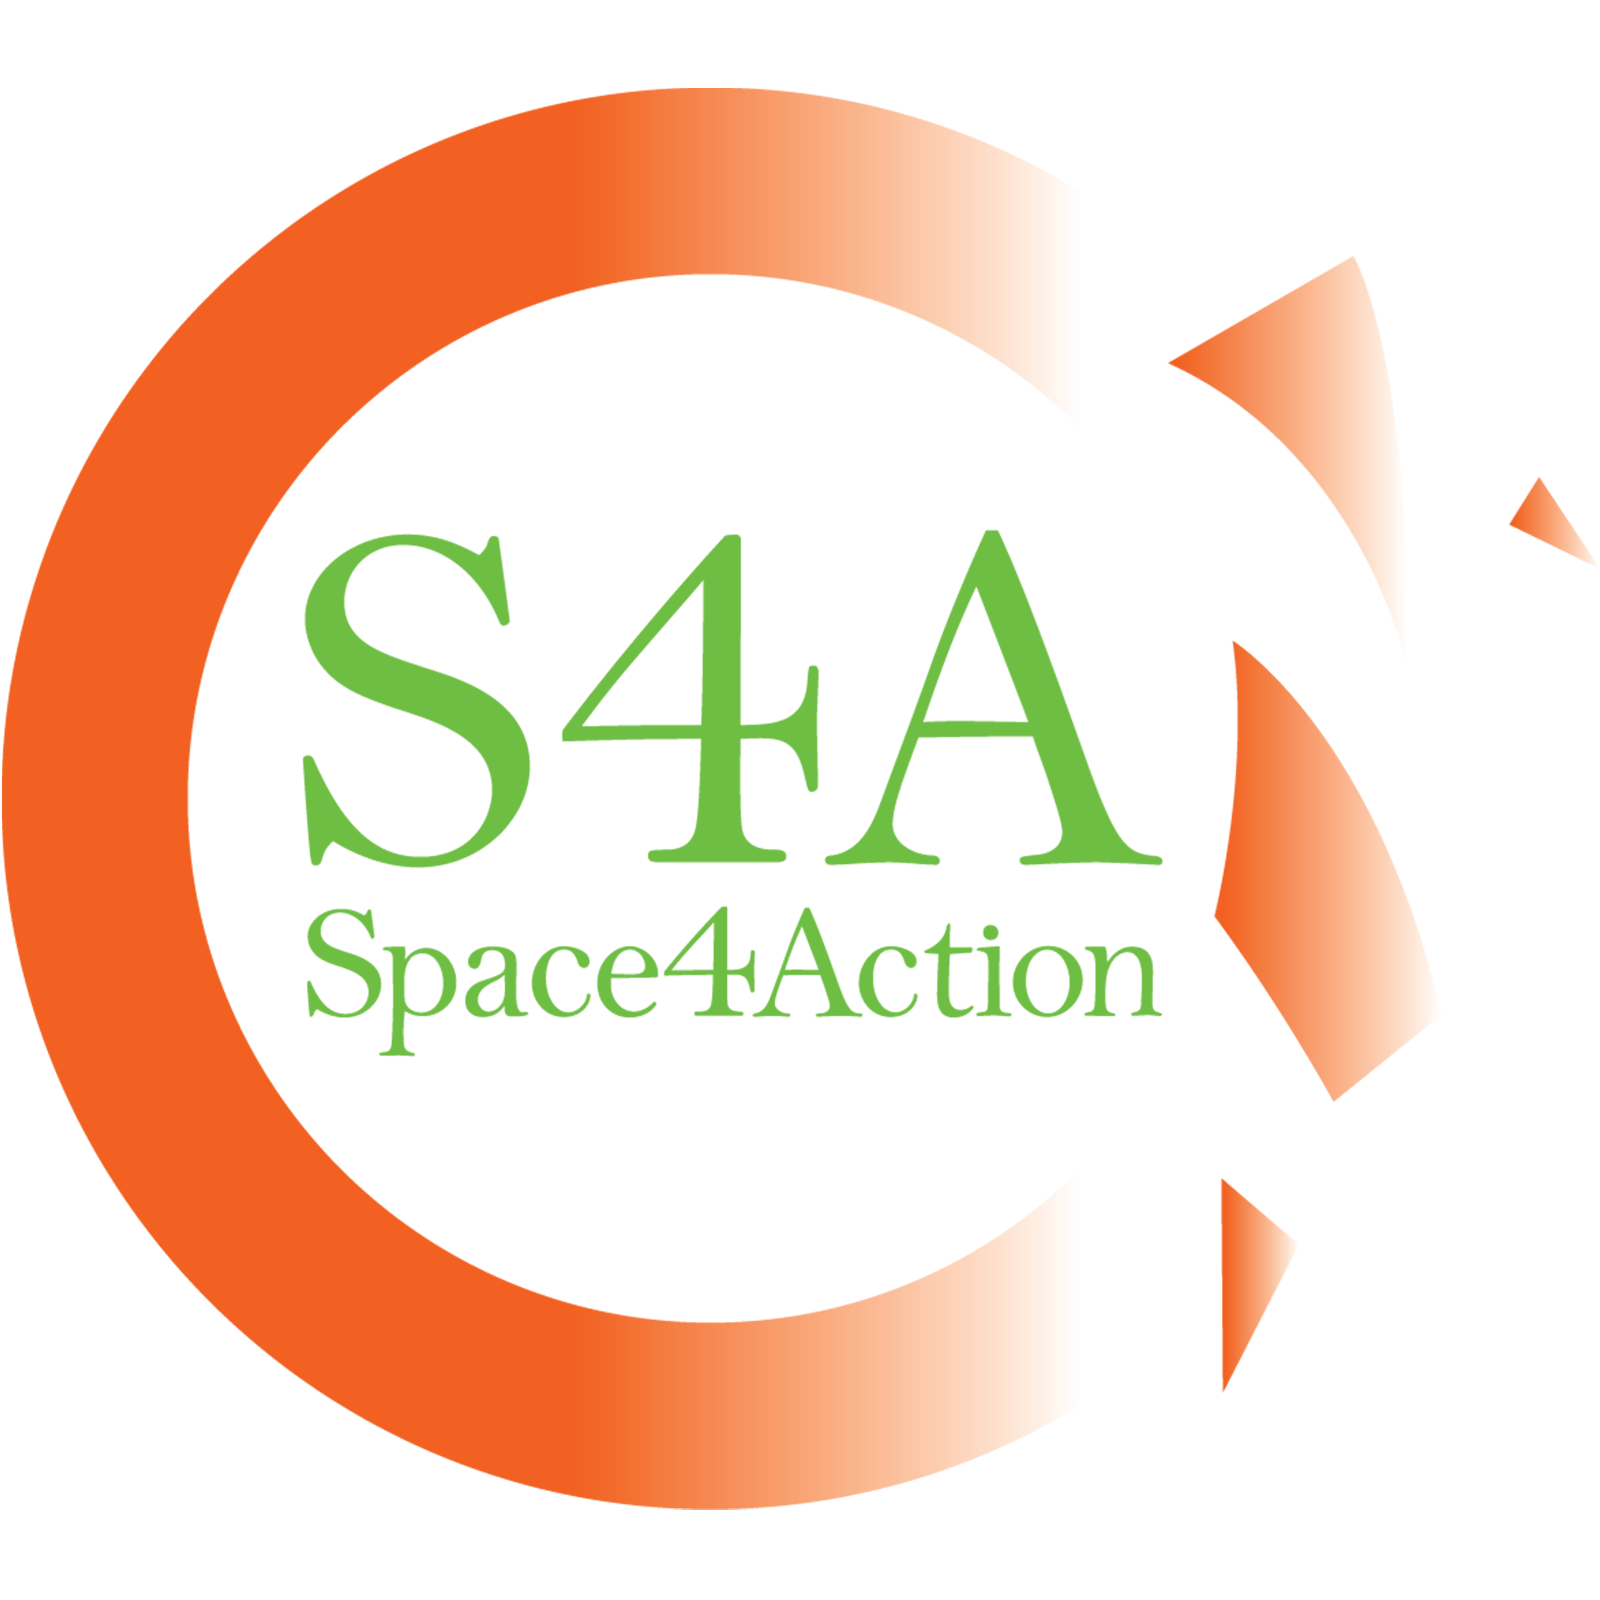 S4A - 'Ask & Act'